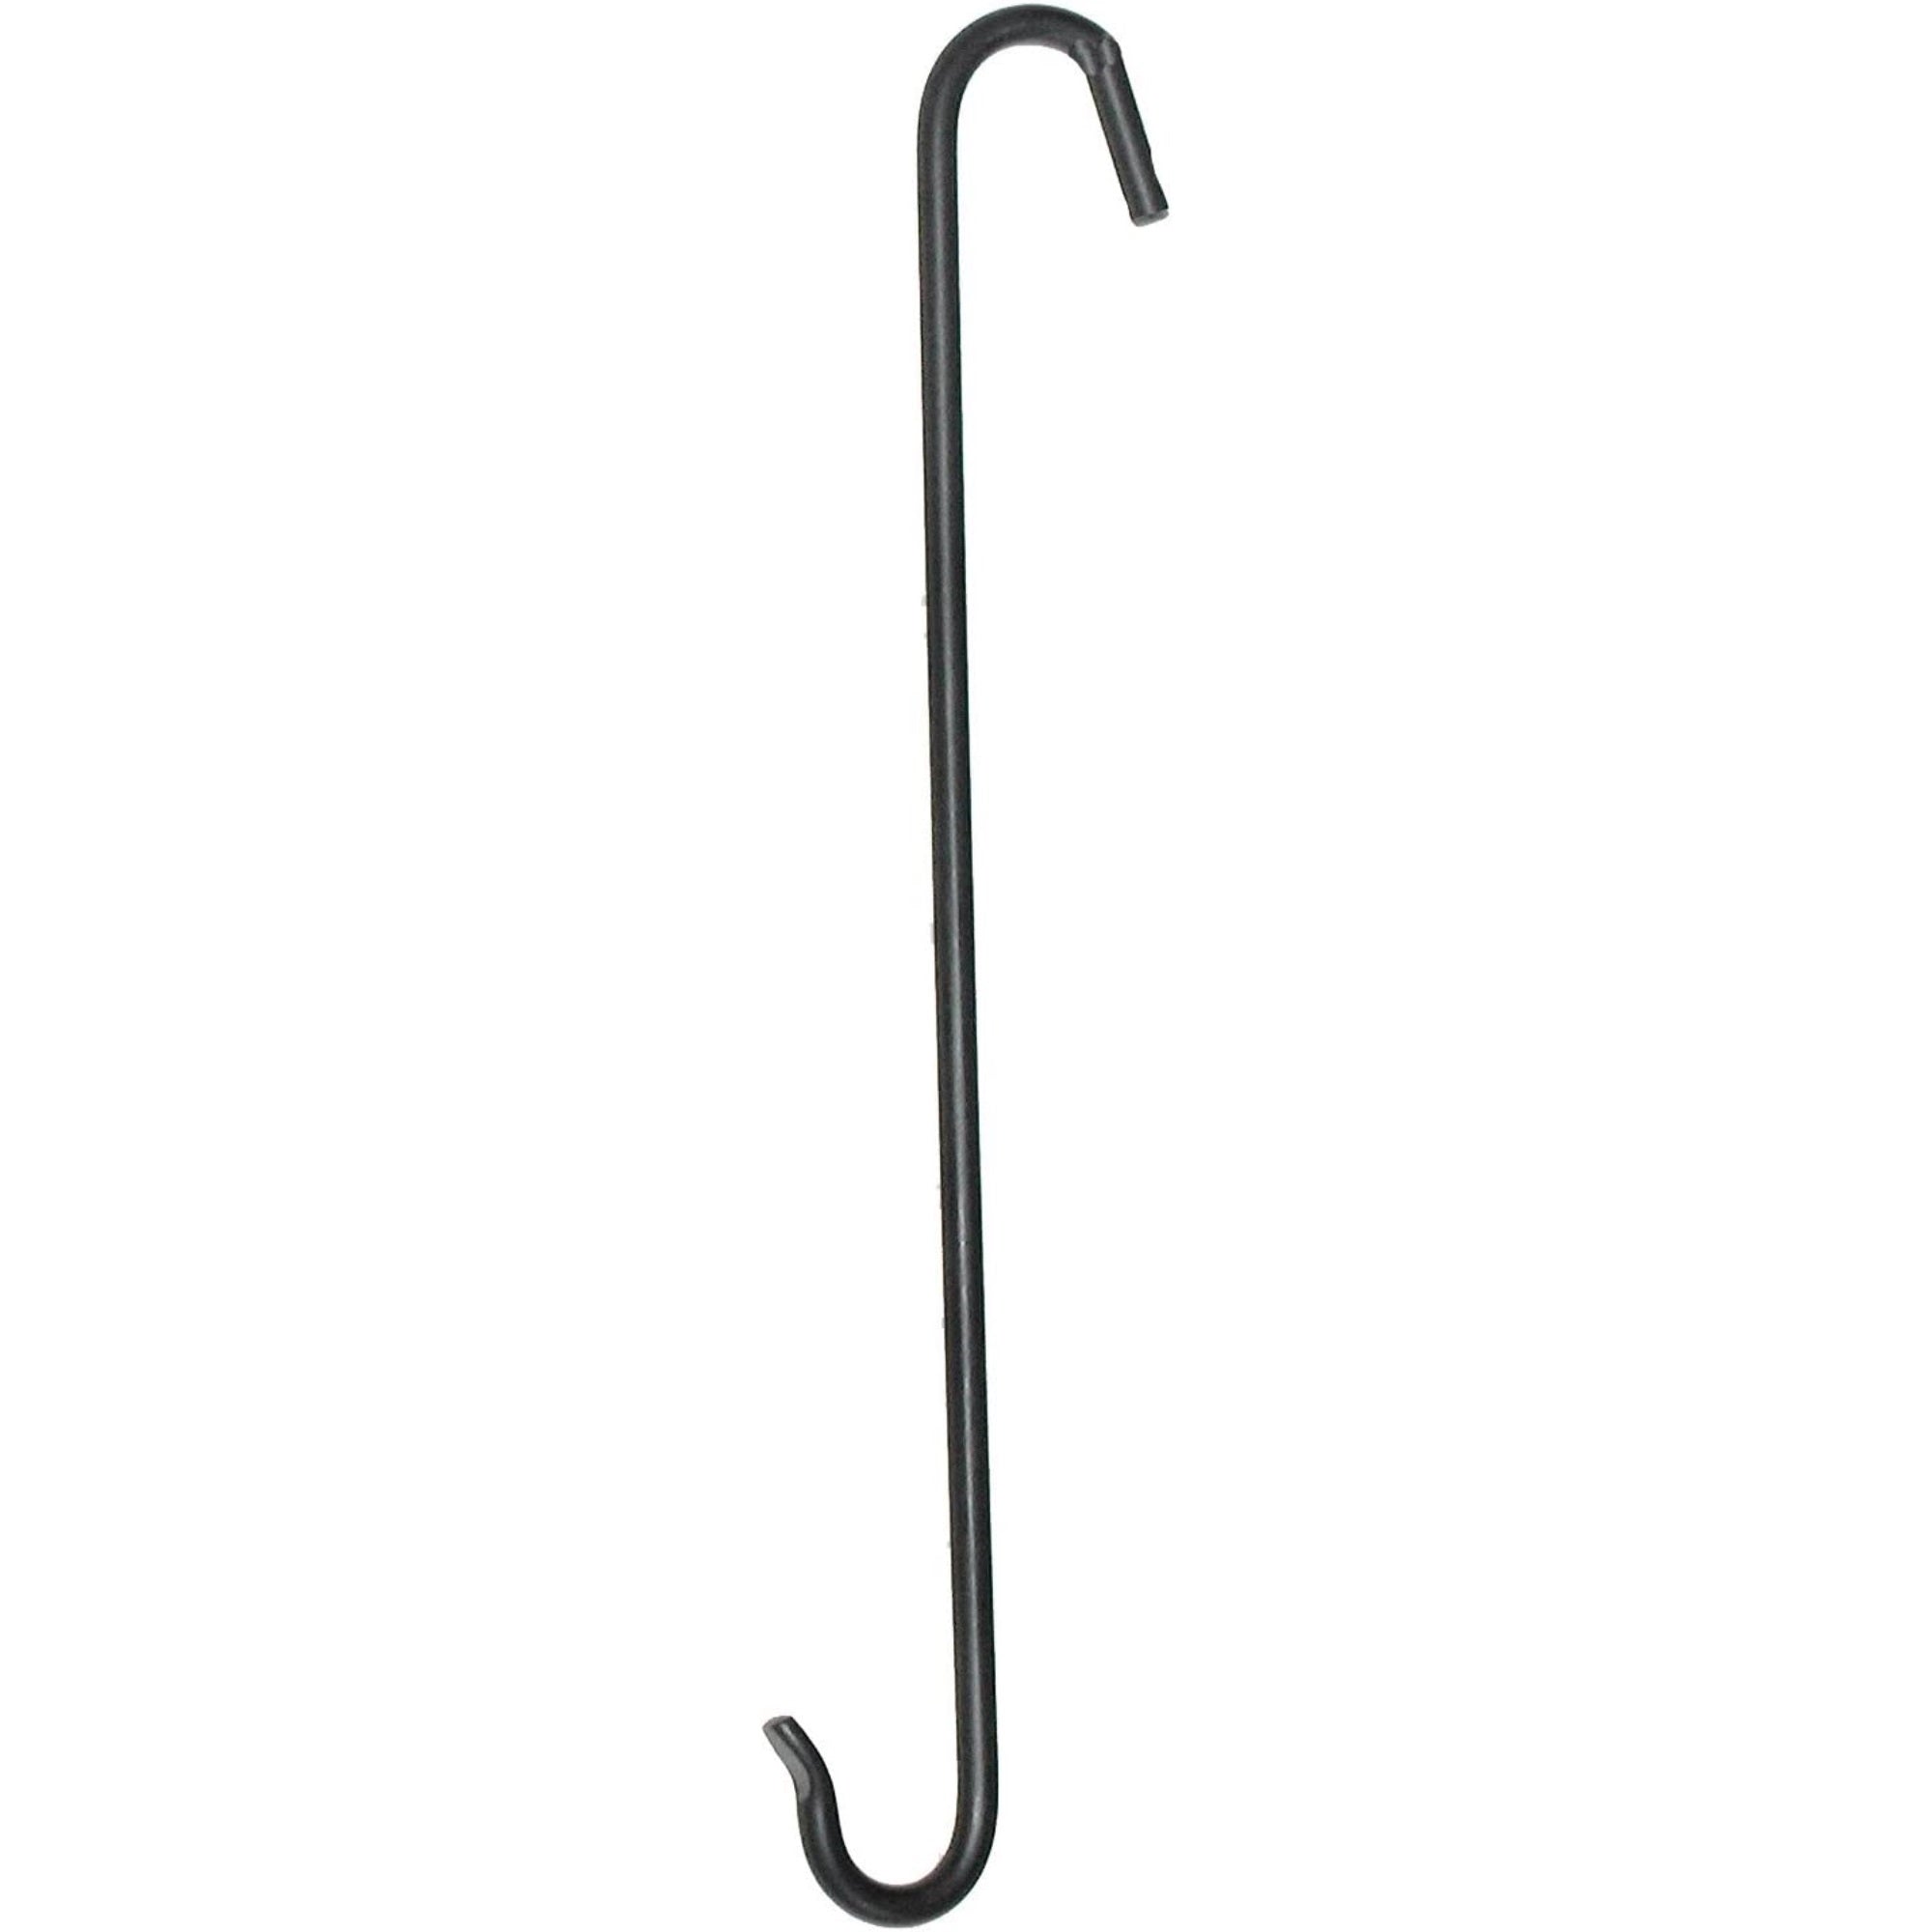 Hookery Powder Coated Metal Extension S Hook With Flared Ends, Black, 12-Inch